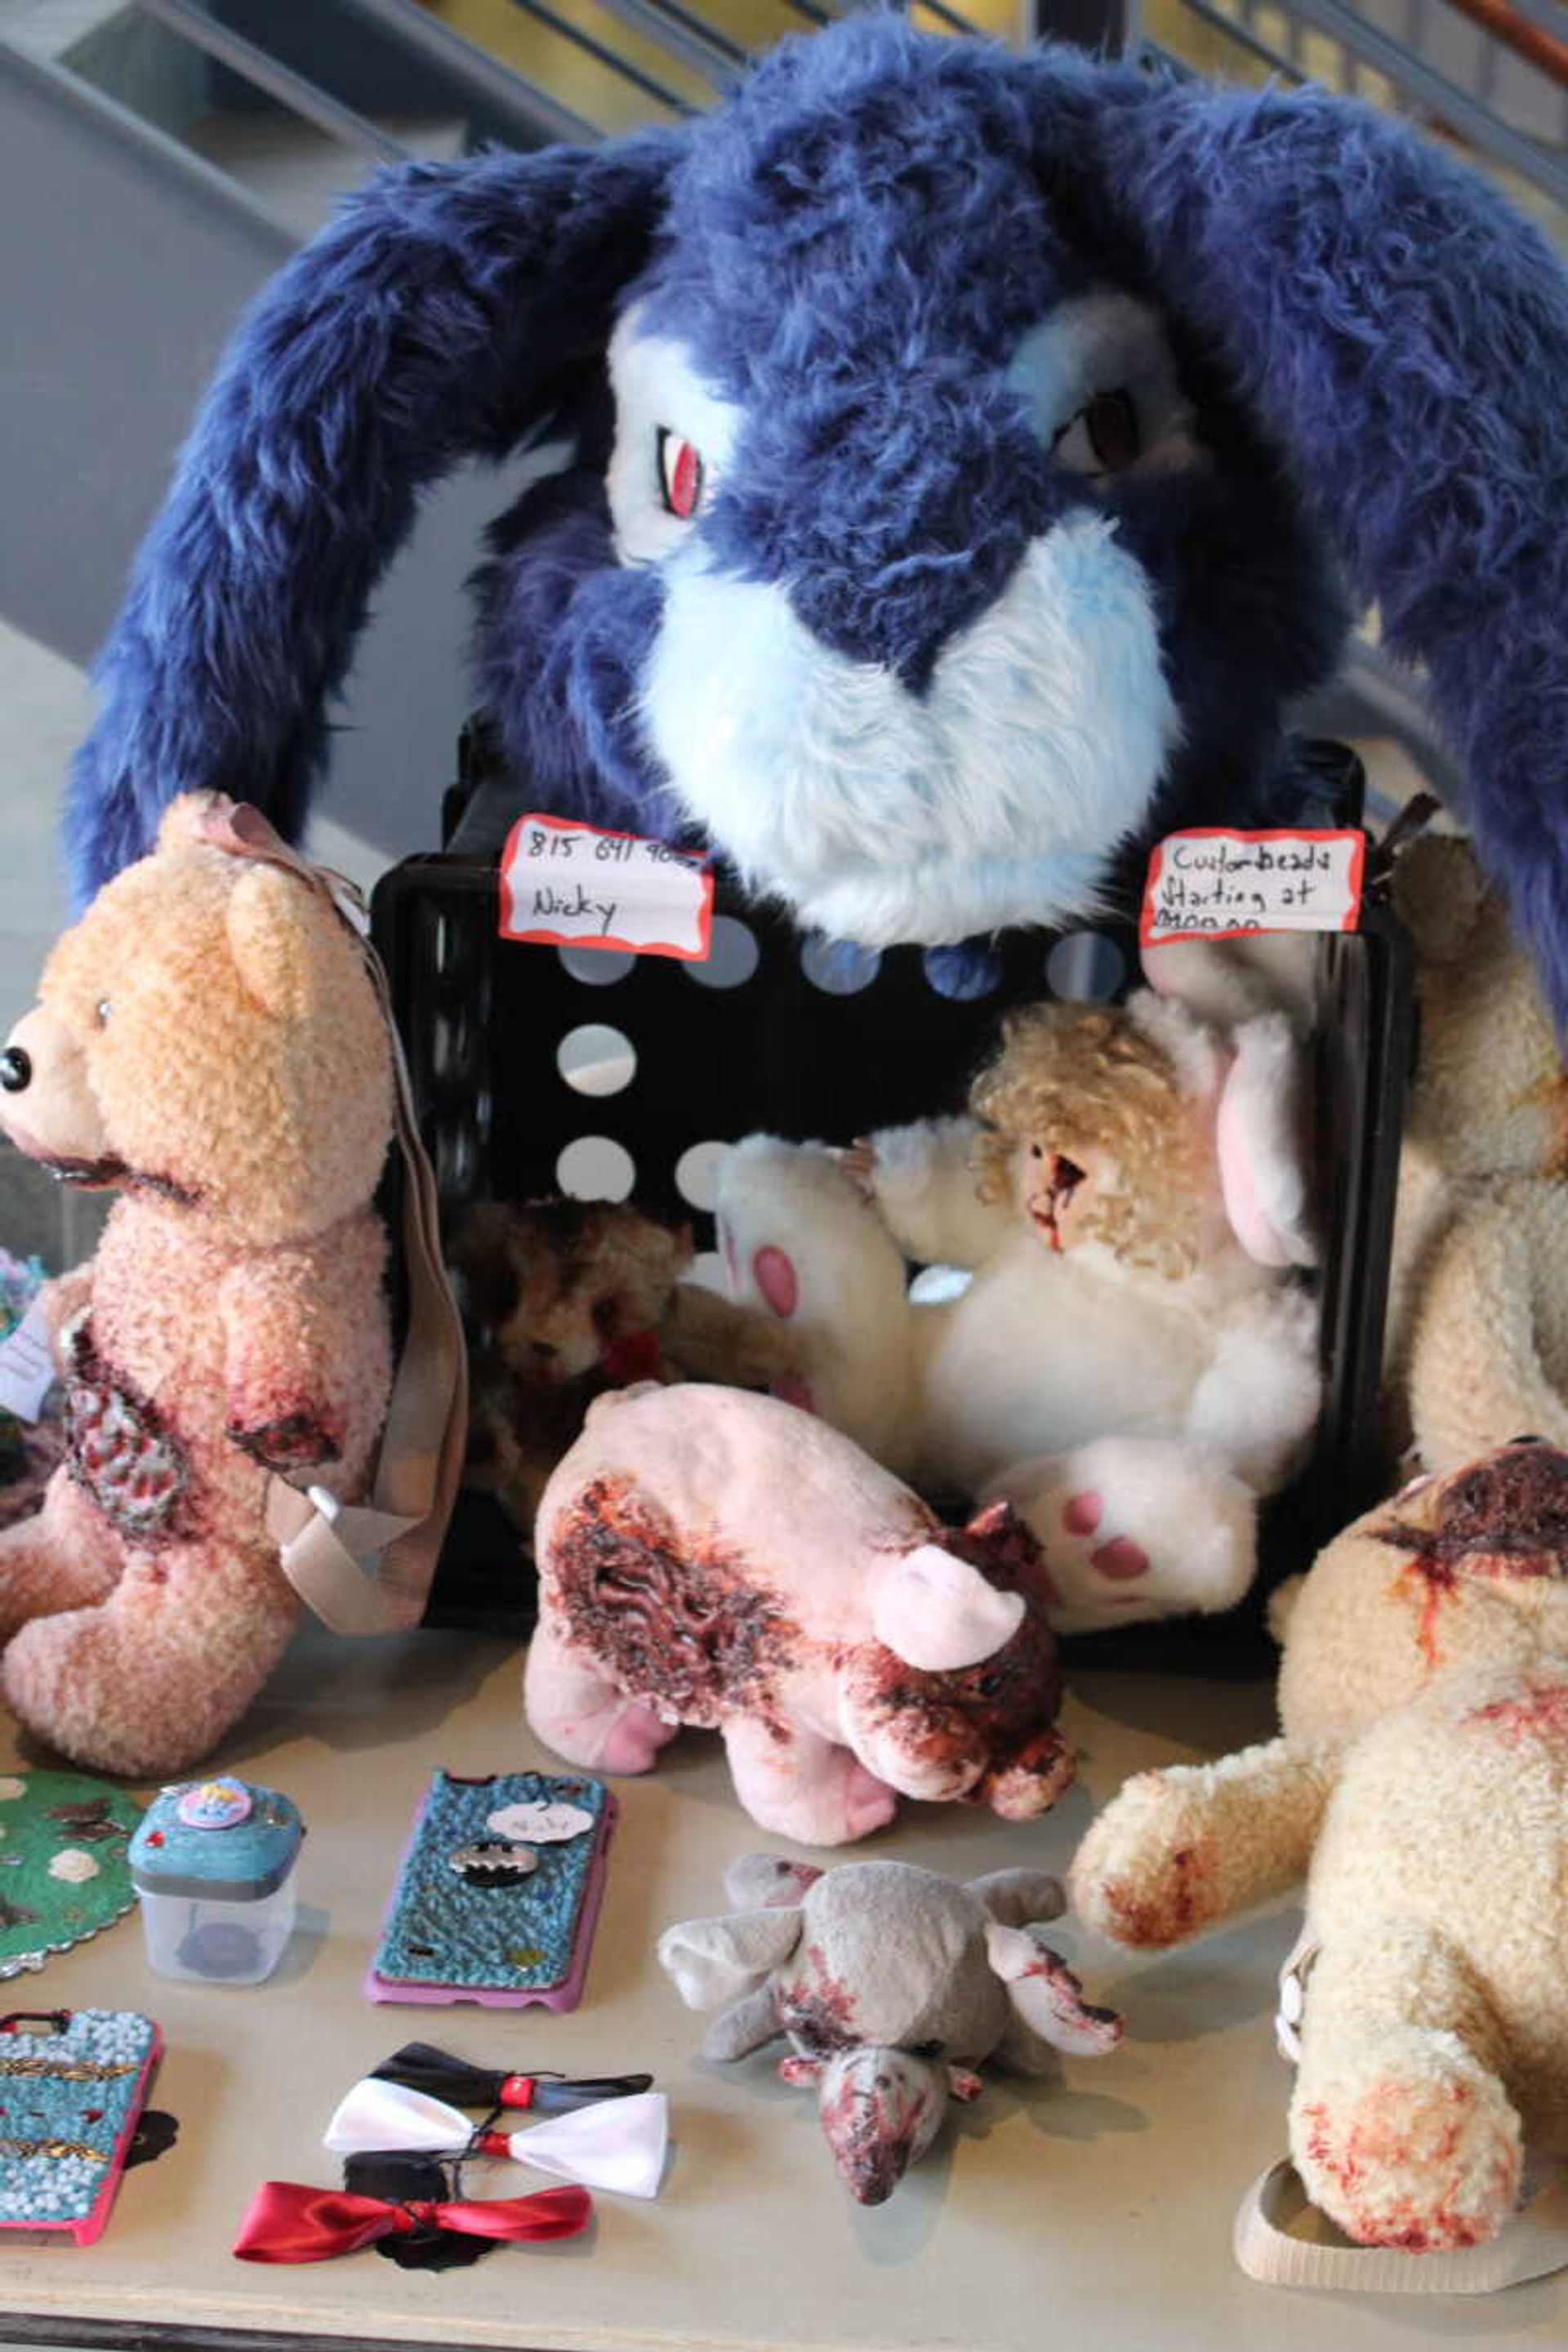 Stuffed animals for sale by artist Nicki Szendzial at Southeast’s Art Guild Annual Show and Sale on Nov. 16.